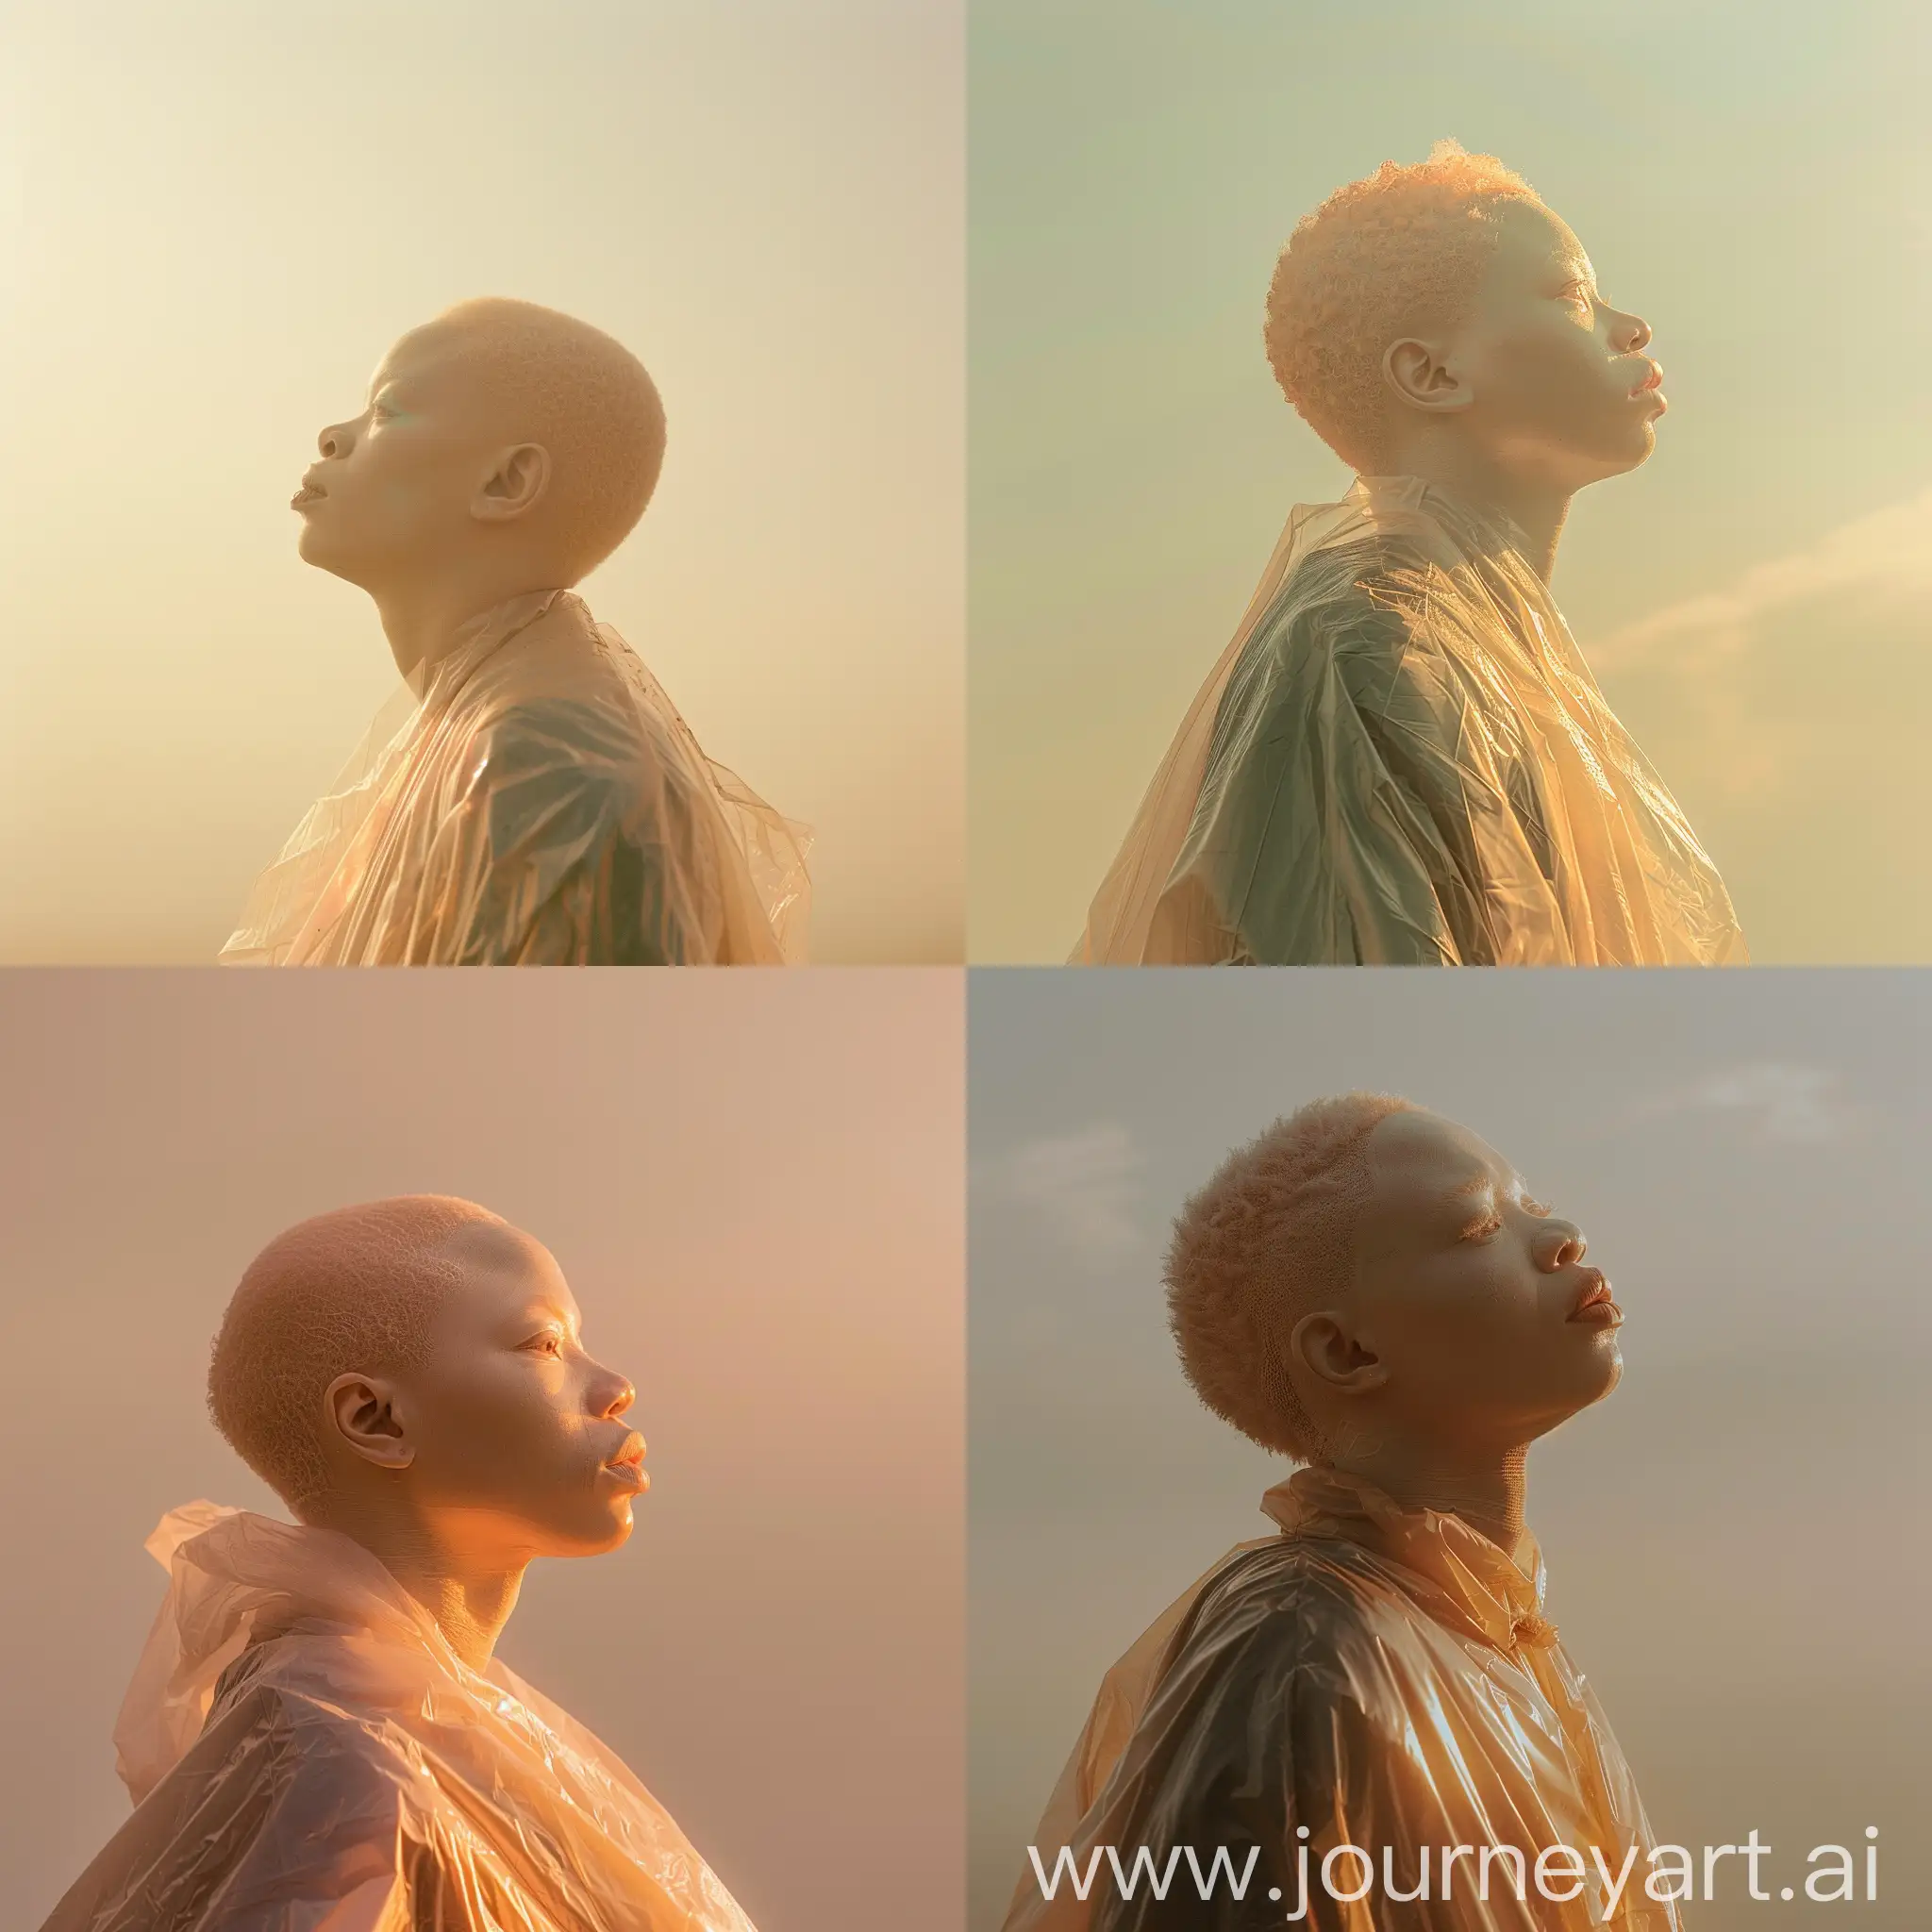 A profile picture of an African albino person looking towards the sun, wearing a plastic robe against a flat background. The image is captured with Kodak-style lighting, embodying a minimalistic aesthetic. The scene highlights the unique beauty and serene expression of the individual, with the sunlight softly illuminating their features. The background is uniform and unobtrusive, ensuring that the focus remains on the person and the interplay of light and shadow on their face and robe. The overall mood of the image is peaceful and contemplative, with a touch of warmth from the sunlight.